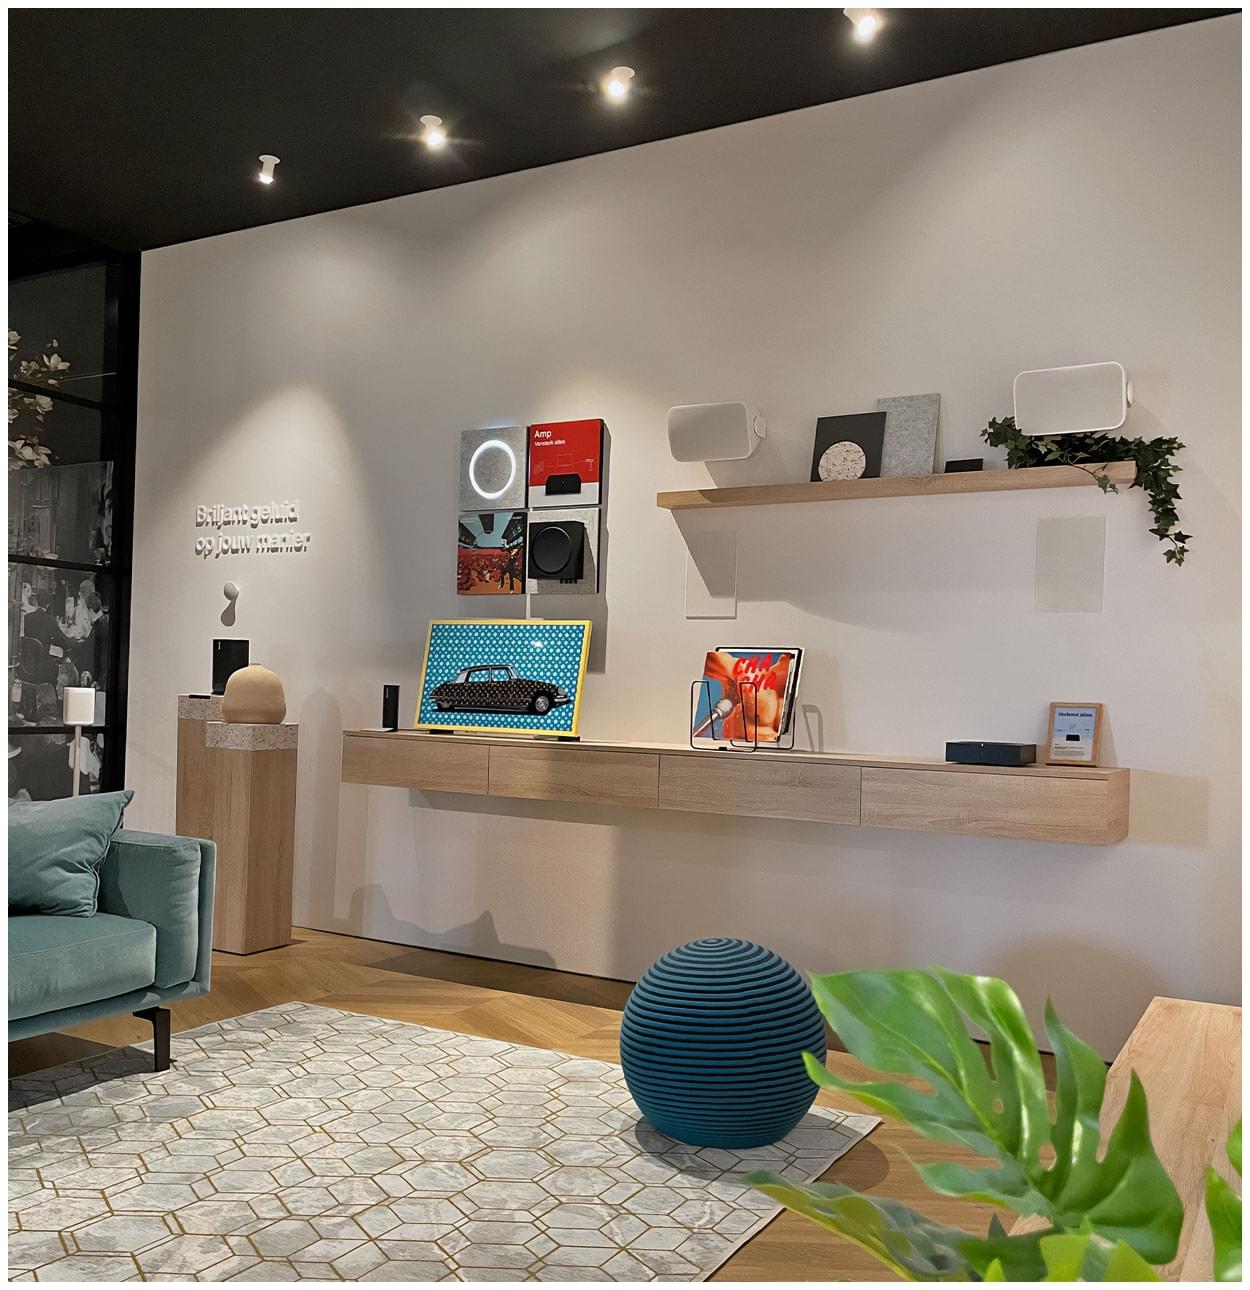 Sonos Experience Store - Spectral Showroom